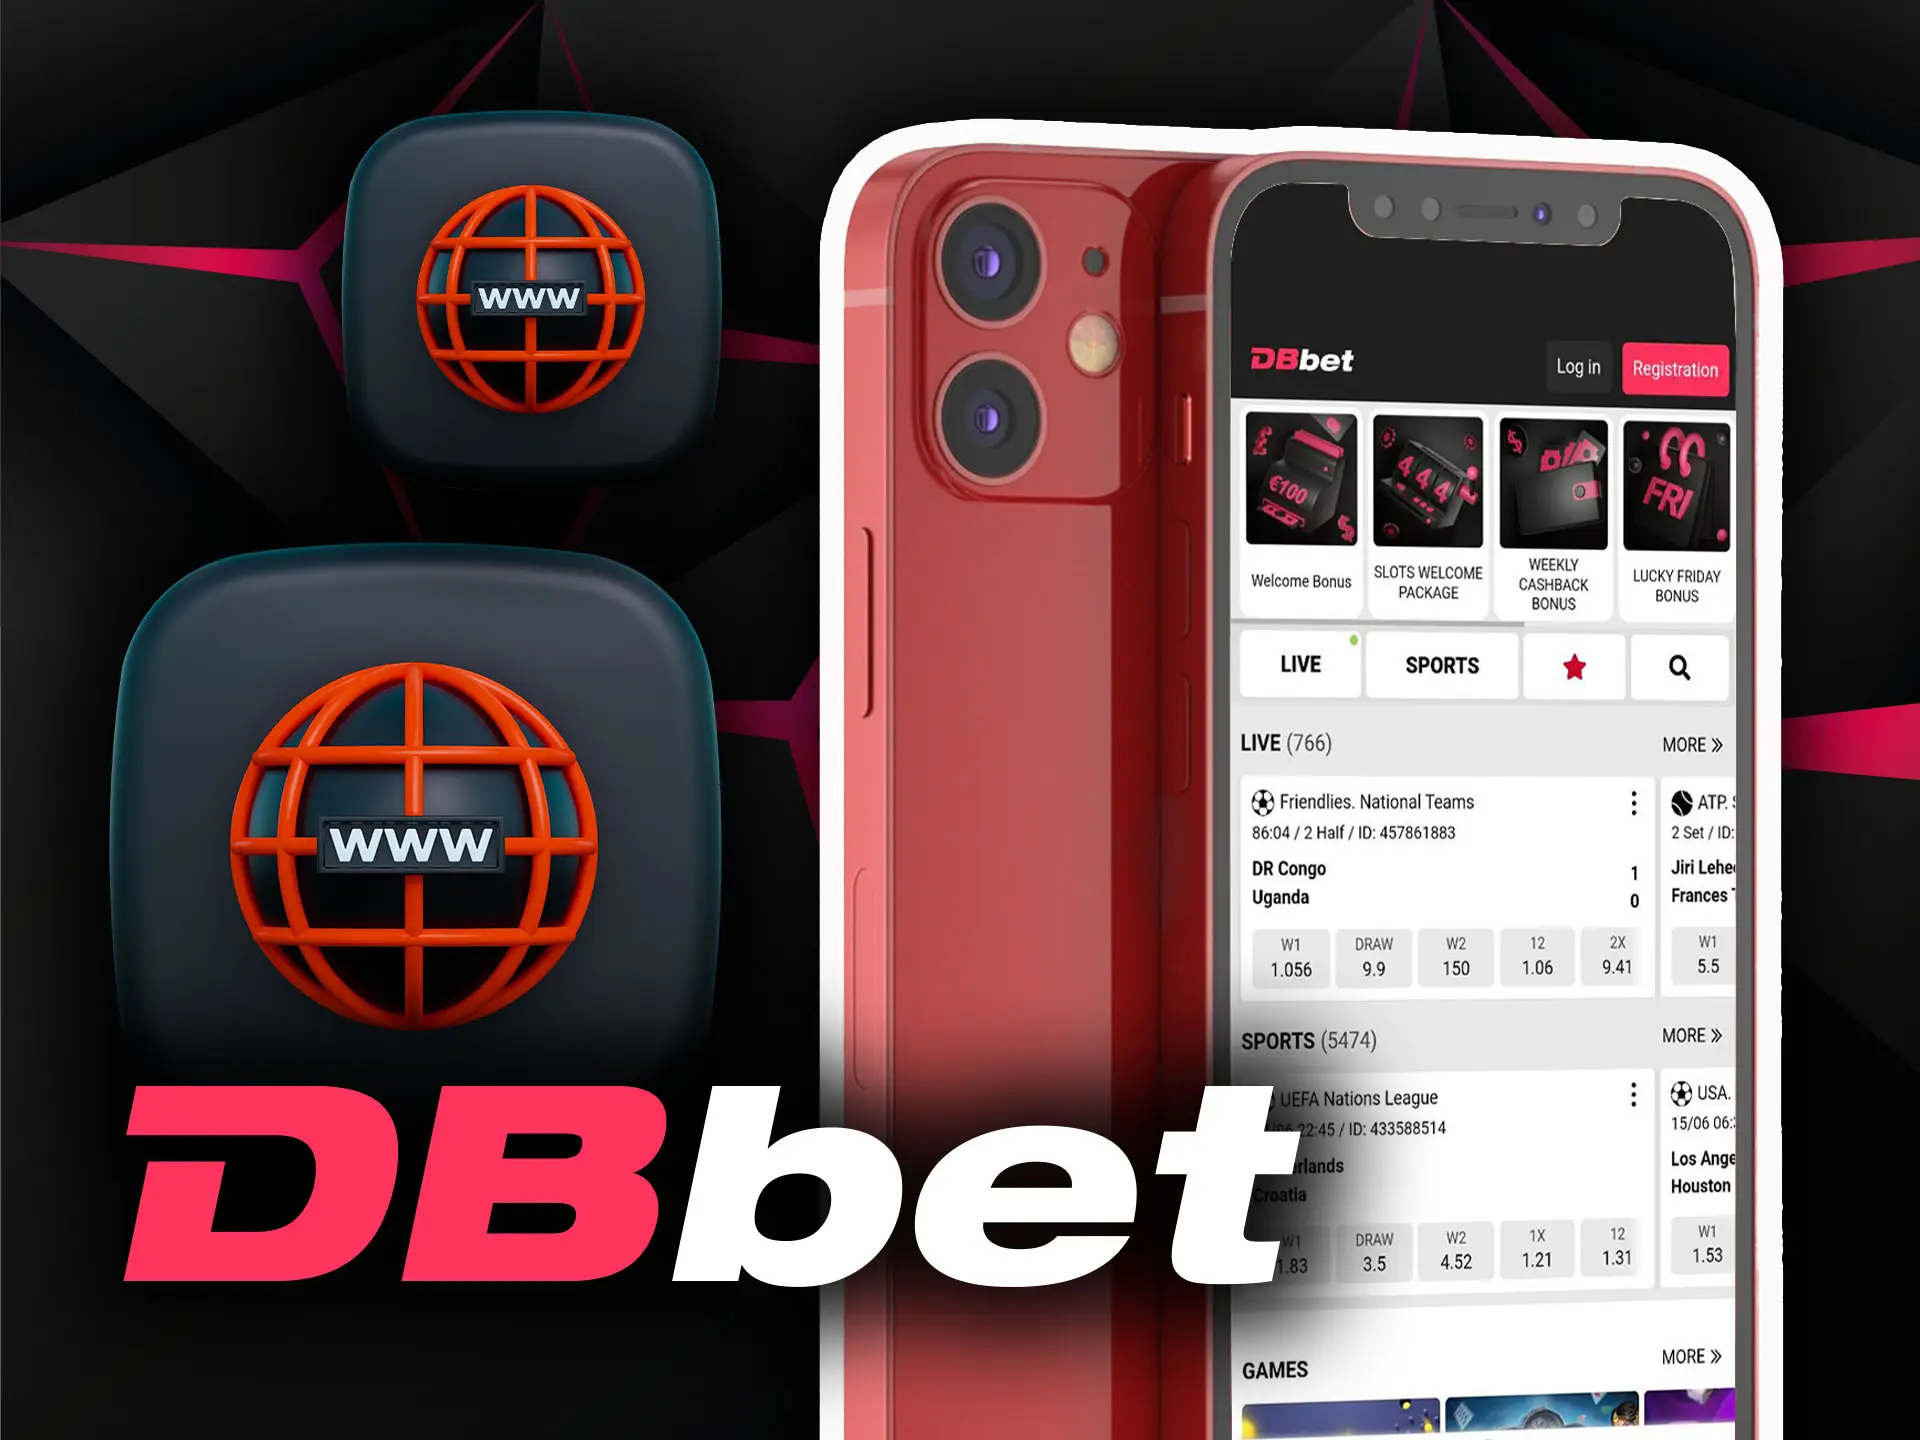 You can bet via the mobile version of DBbet if you don't want to download any software.